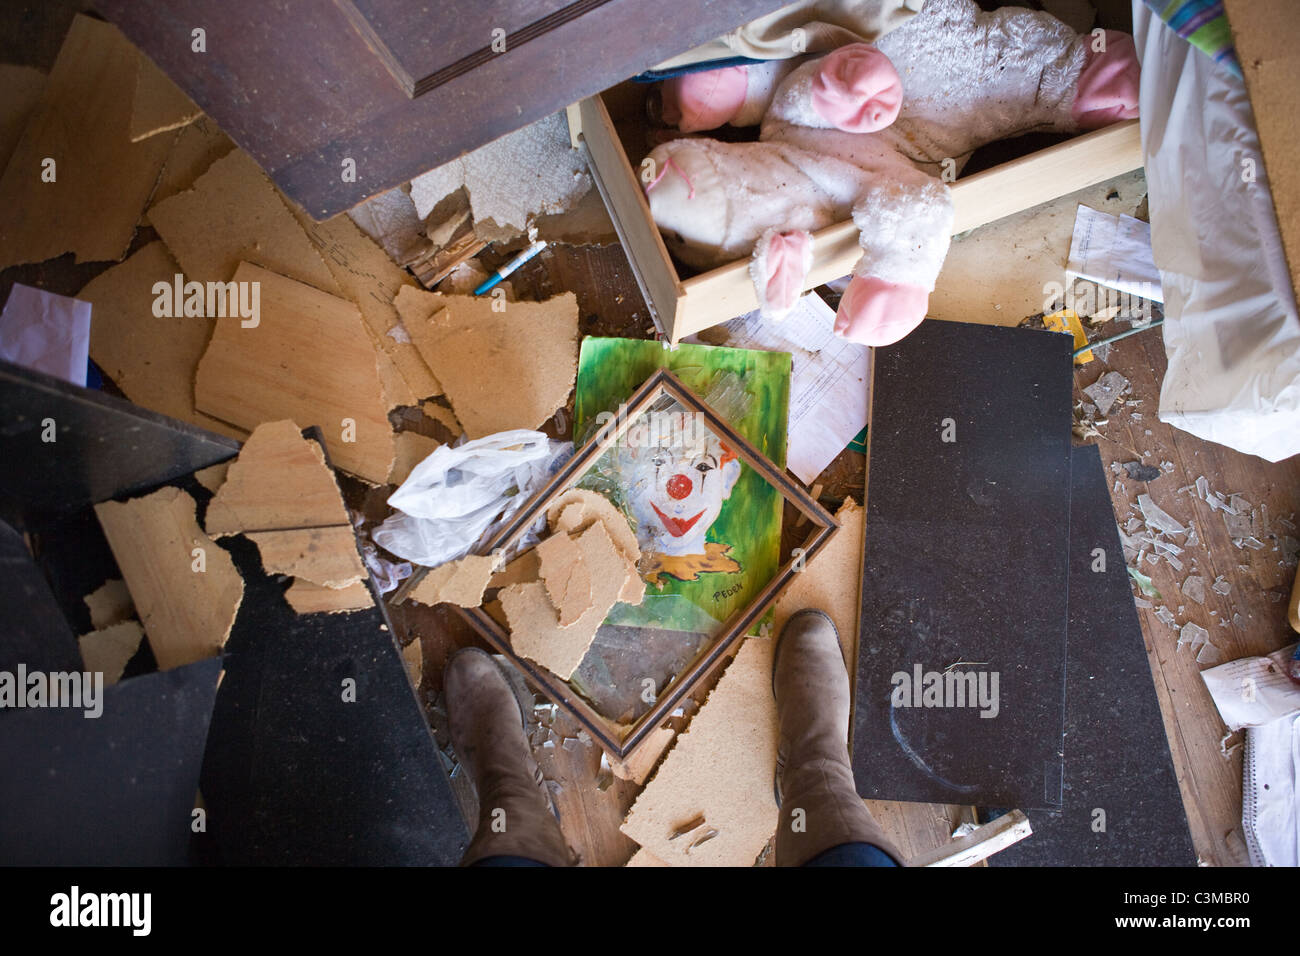 broken toys and drawings on the floor of a child's room after tornado destroyed home, Alabama, May 2011 Stock Photo